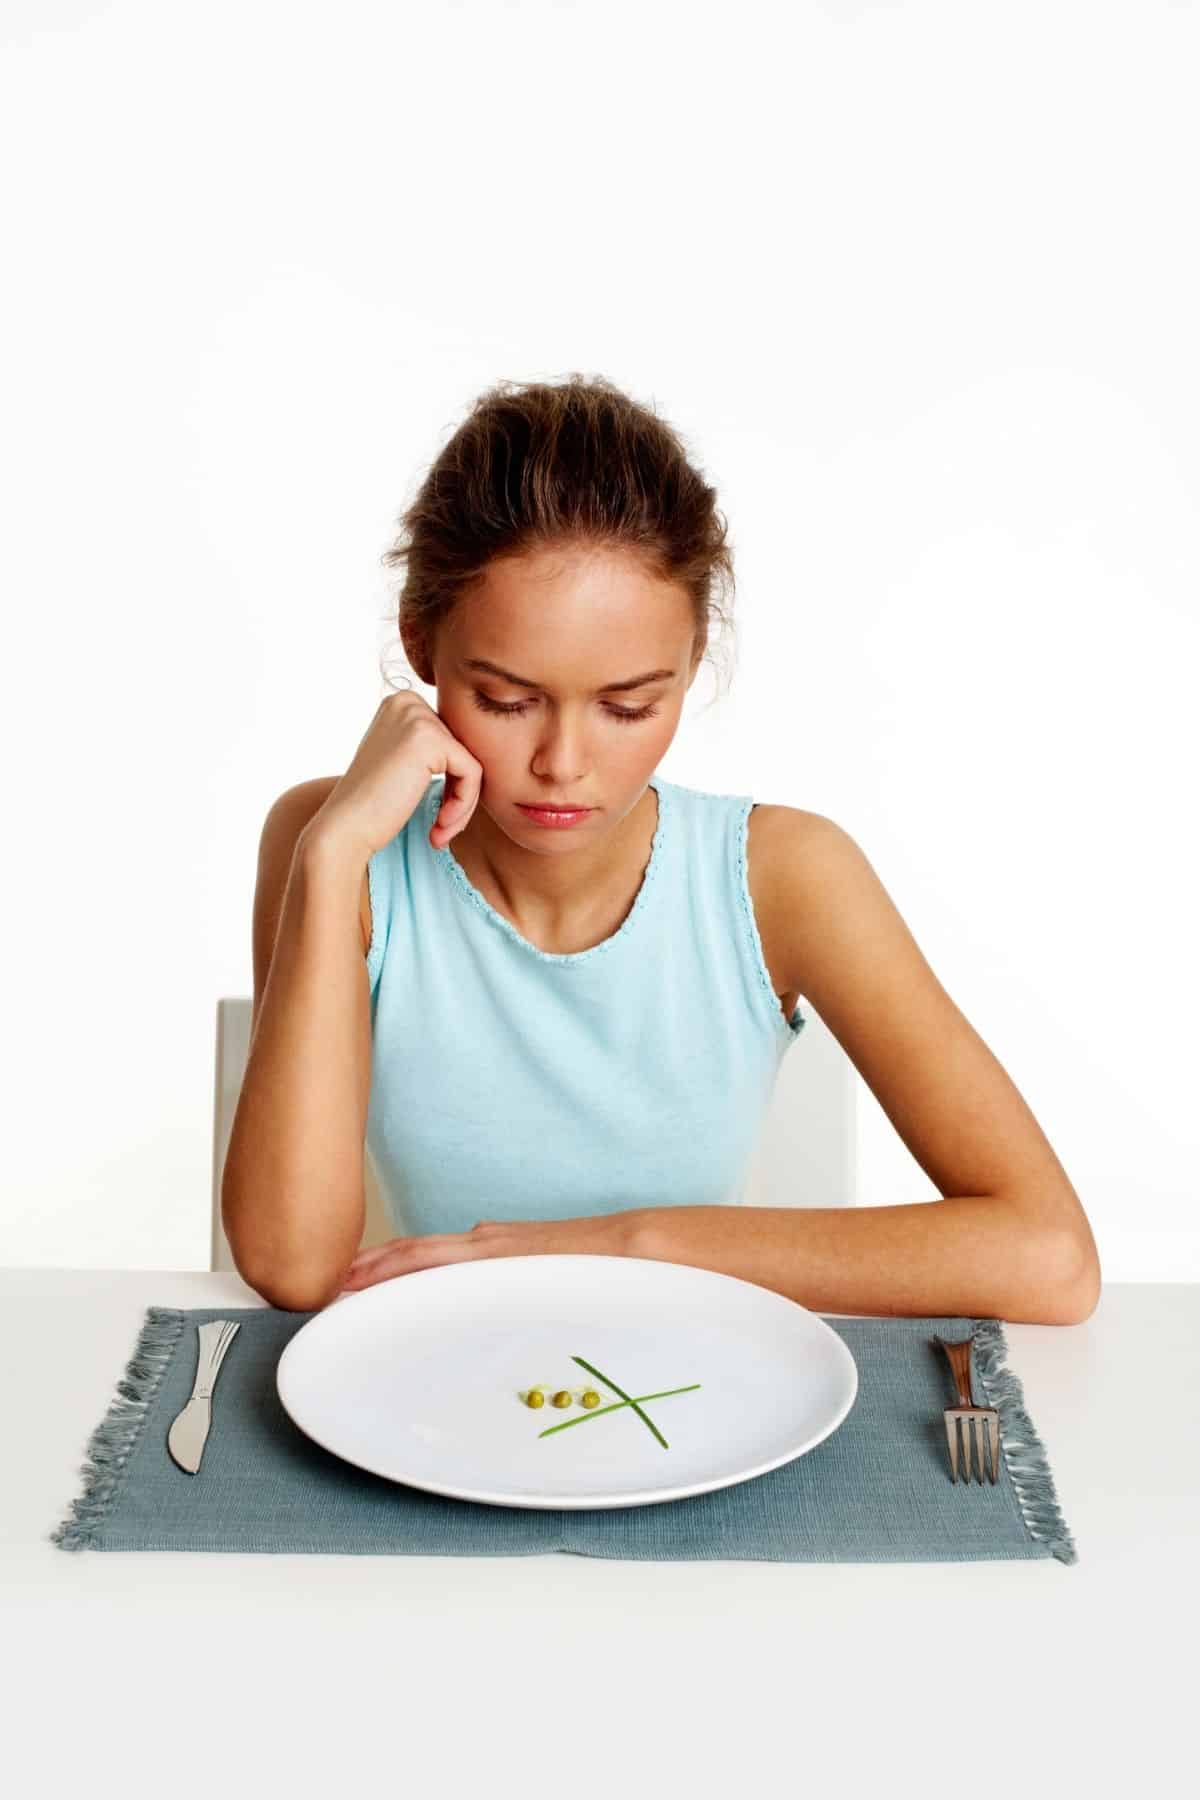 woman sitting in front of a plate with just a little bit of food on it